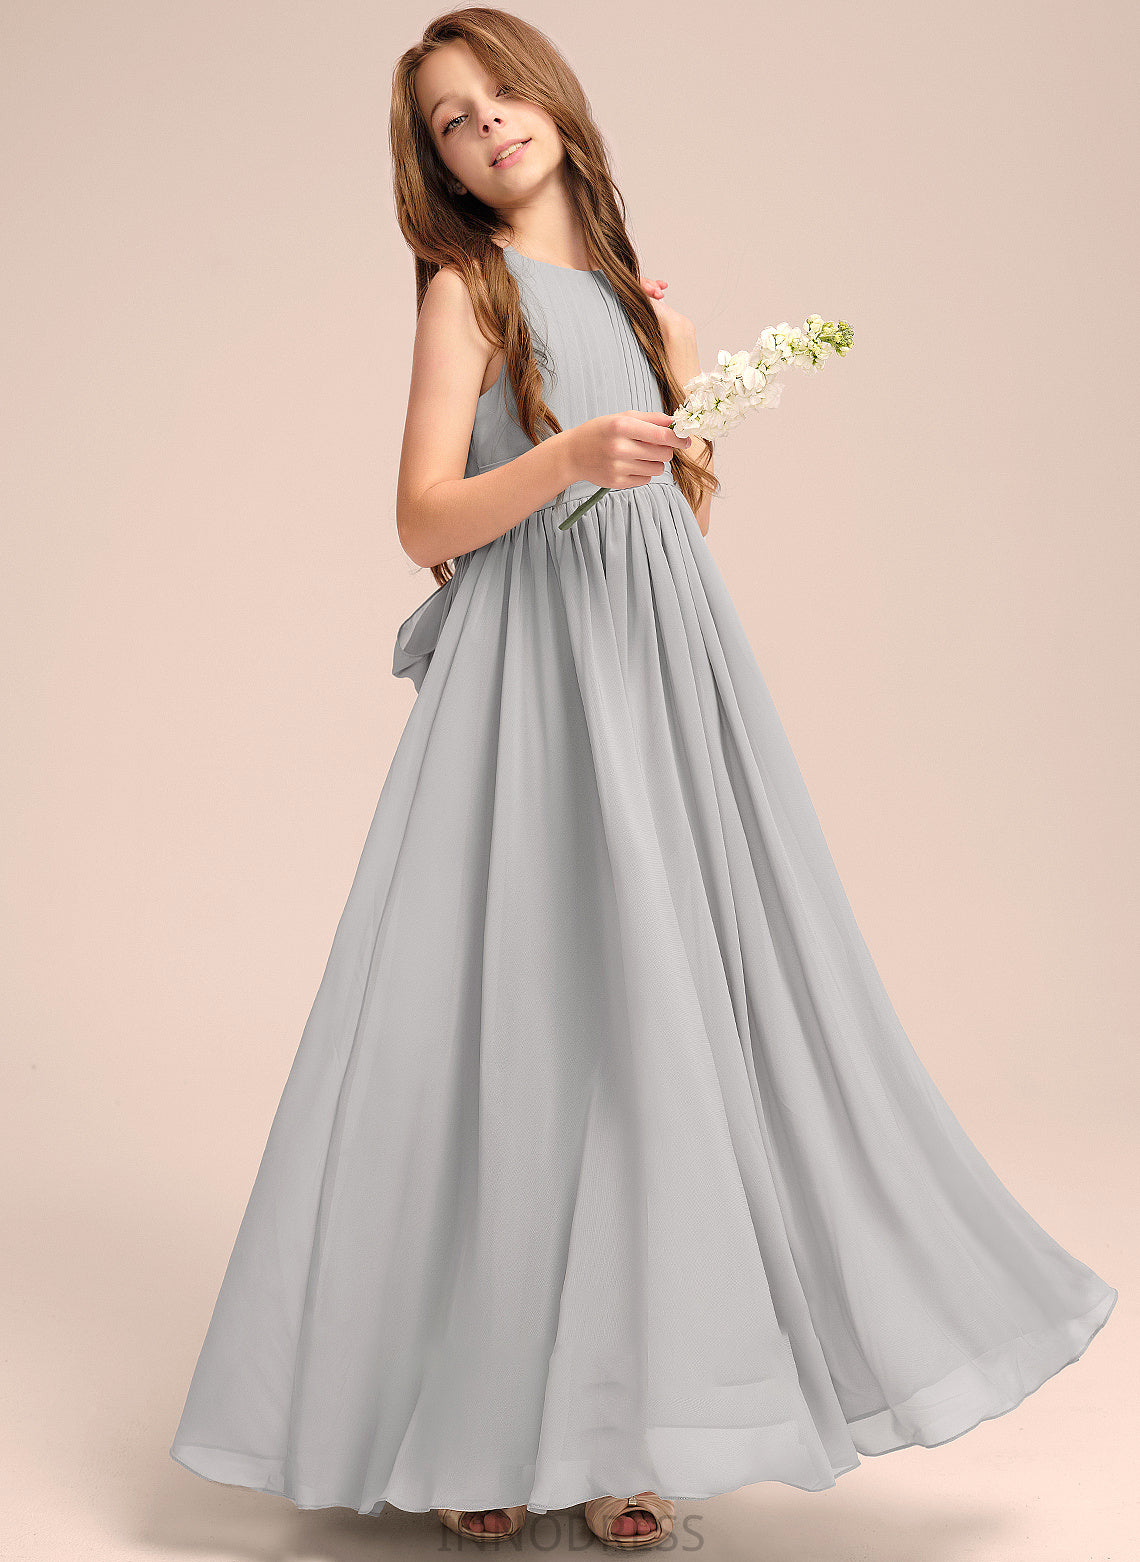 Alexis Junior Bridesmaid Dresses Floor-Length Scoop Bow(s) Chiffon Ruffle With Neck A-Line